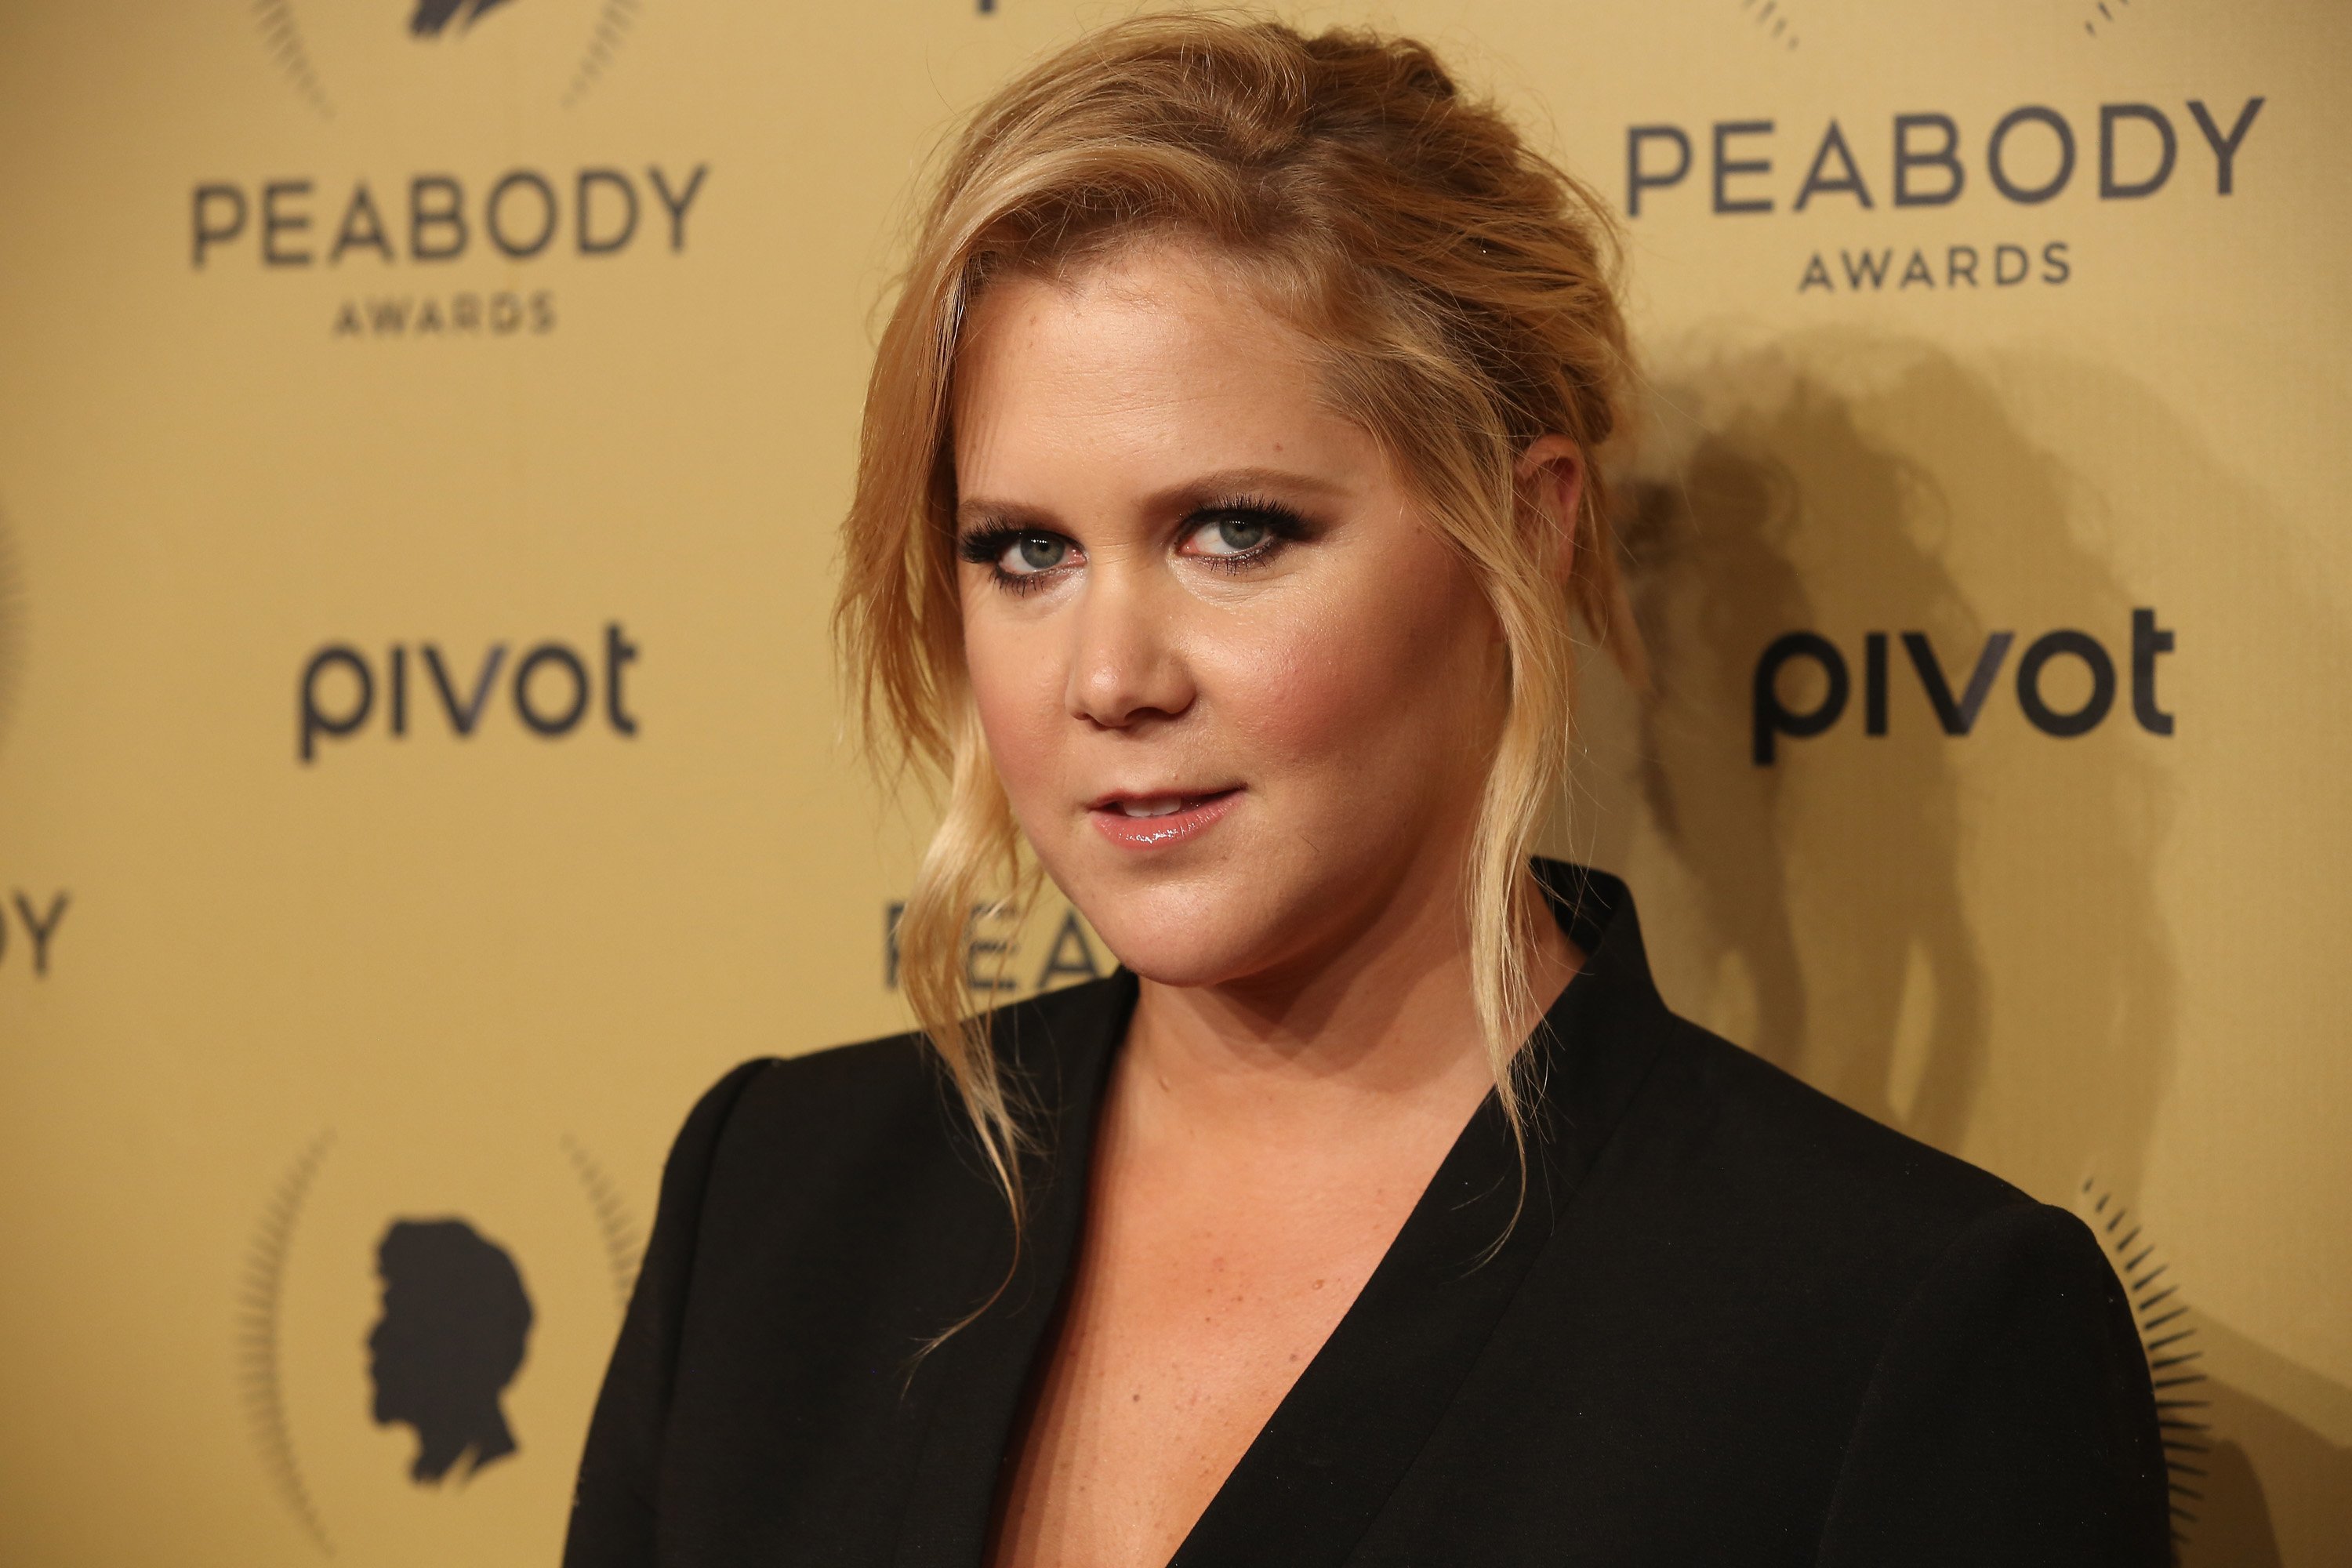 Amy Schumer attends The 74th Annual Peabody Awards Ceremony on May 31, 2015, in New York City. | Photo: Getty Images.